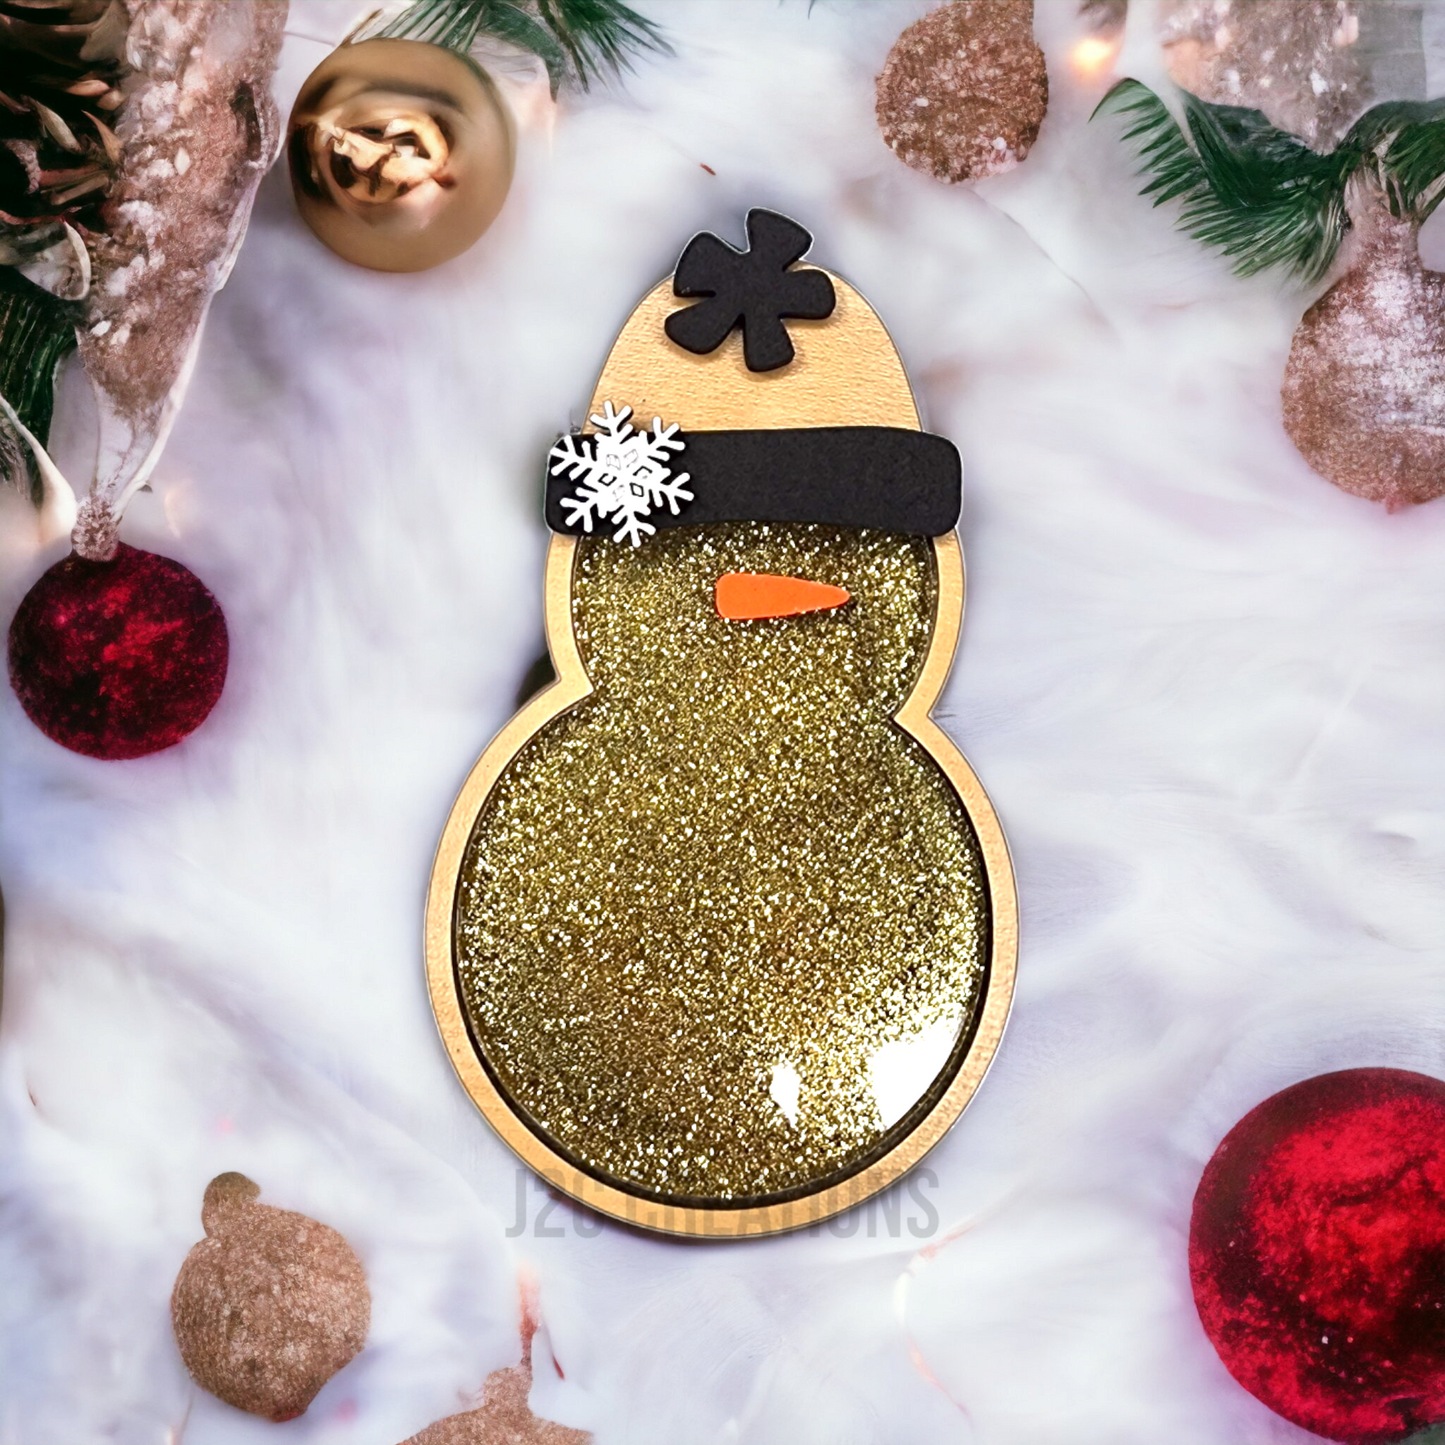 Snowman Shaker Christmas Ornament - personalized